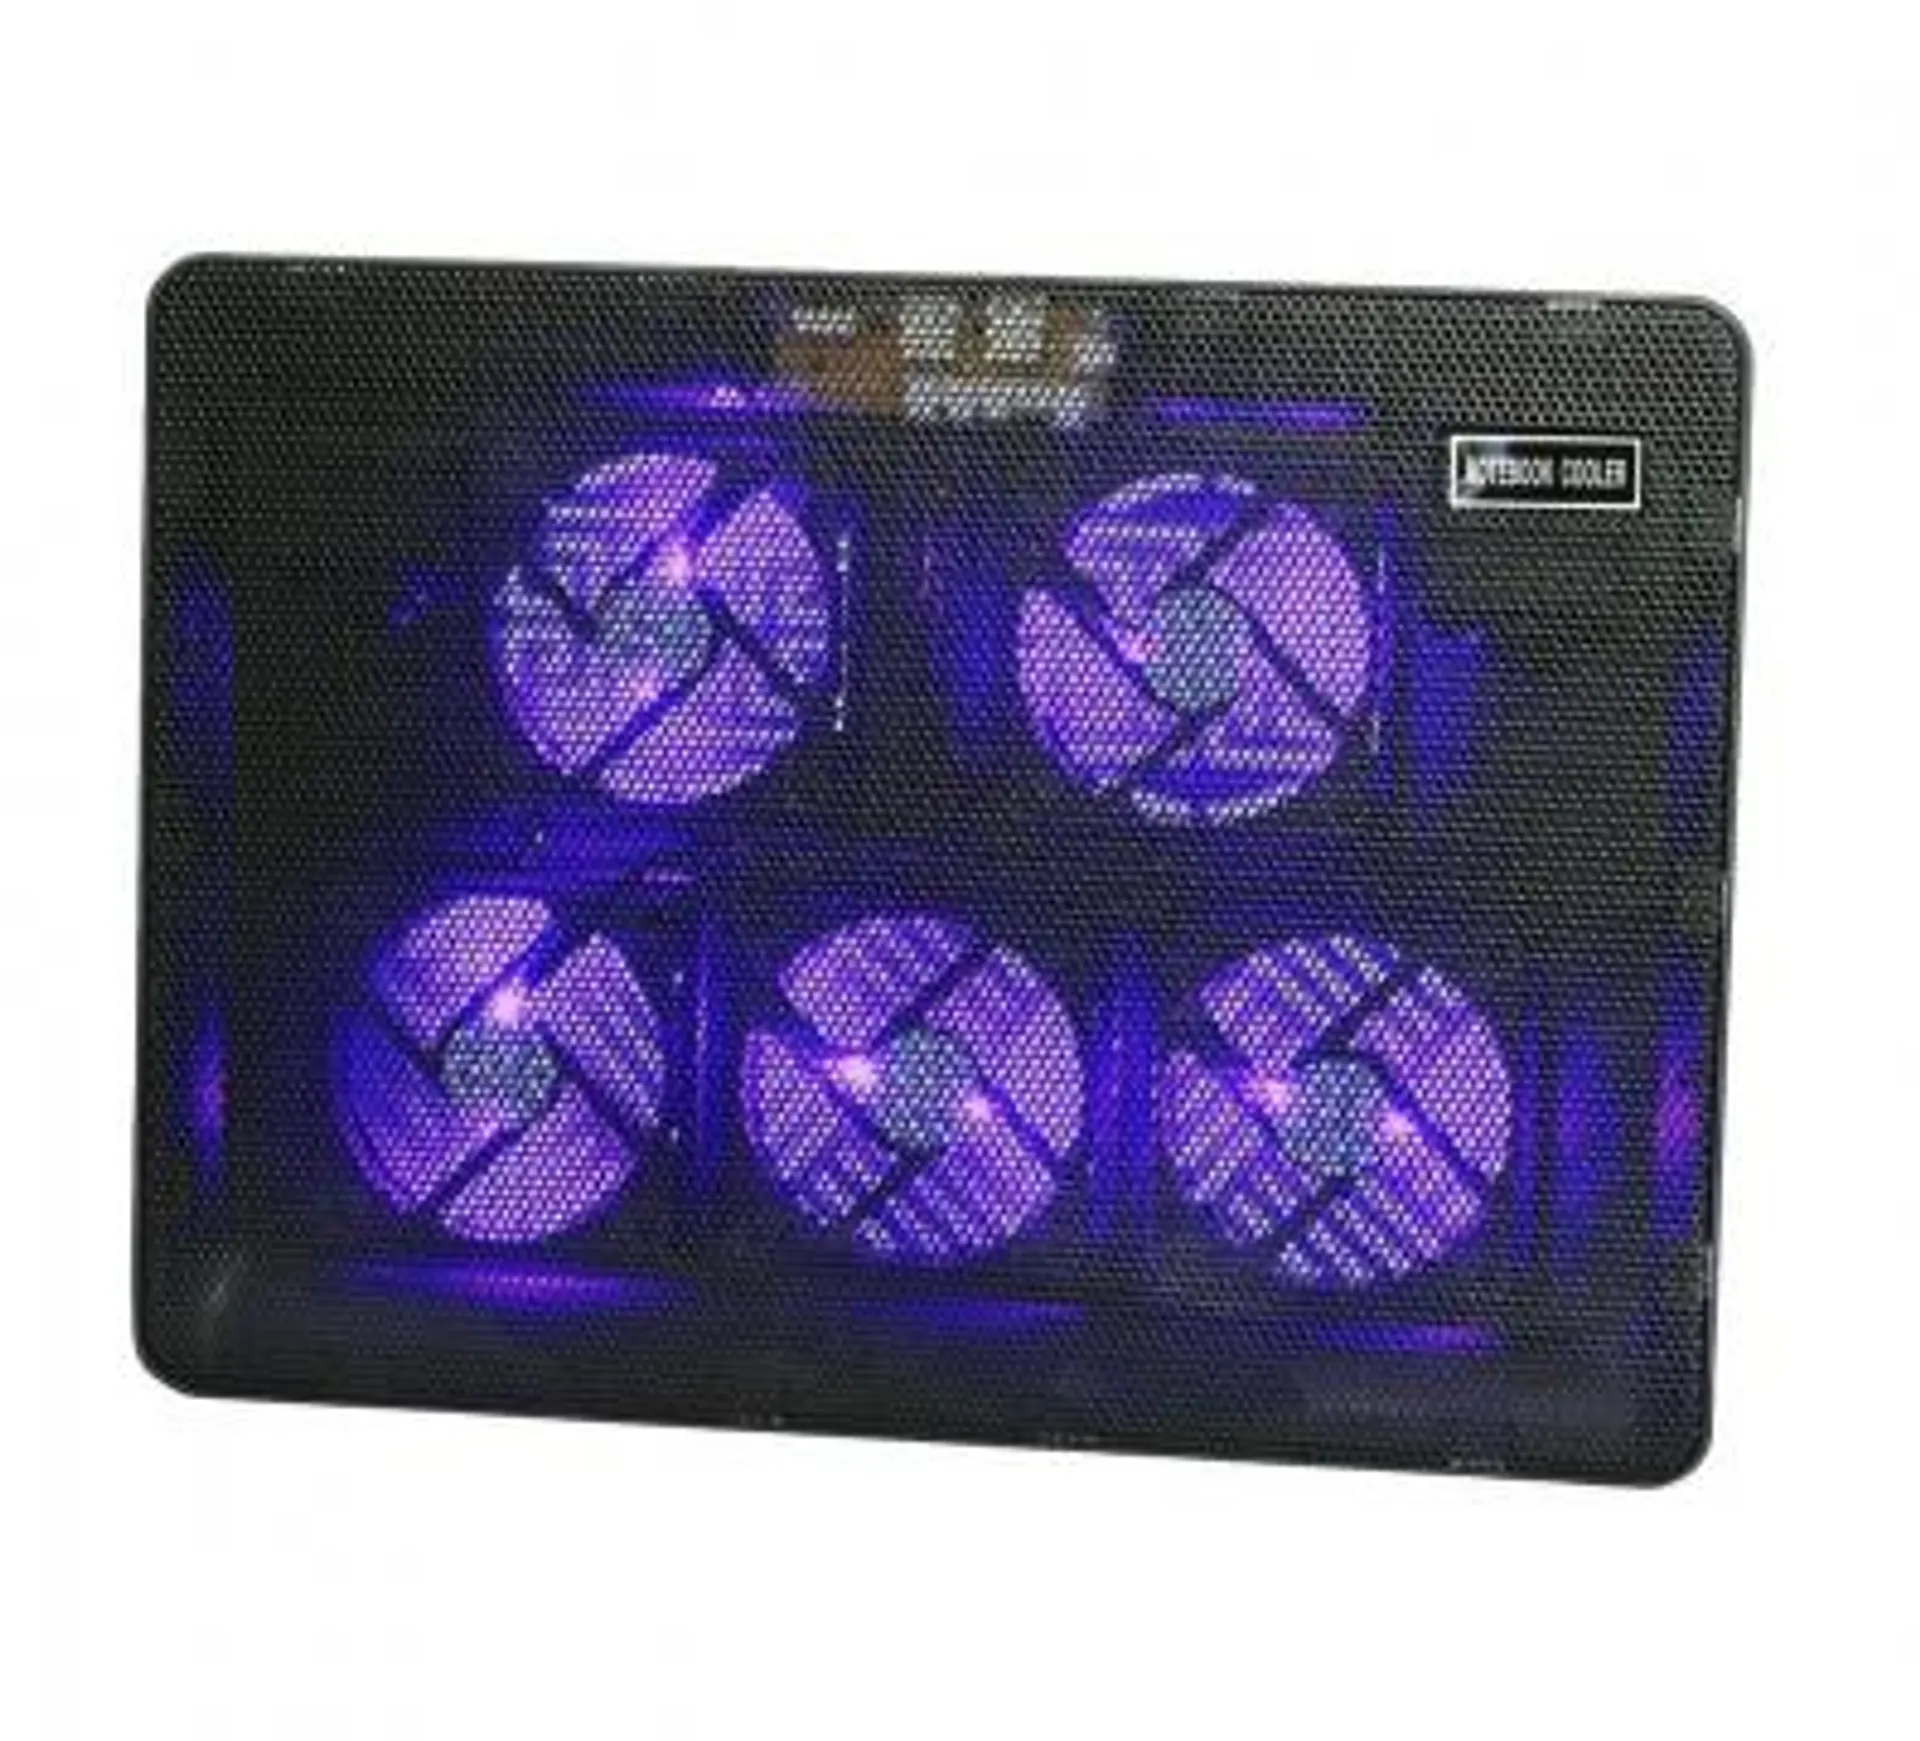 12-17 Inch USB Laptop Cooling Pad Cooler 5 Fans Cooling